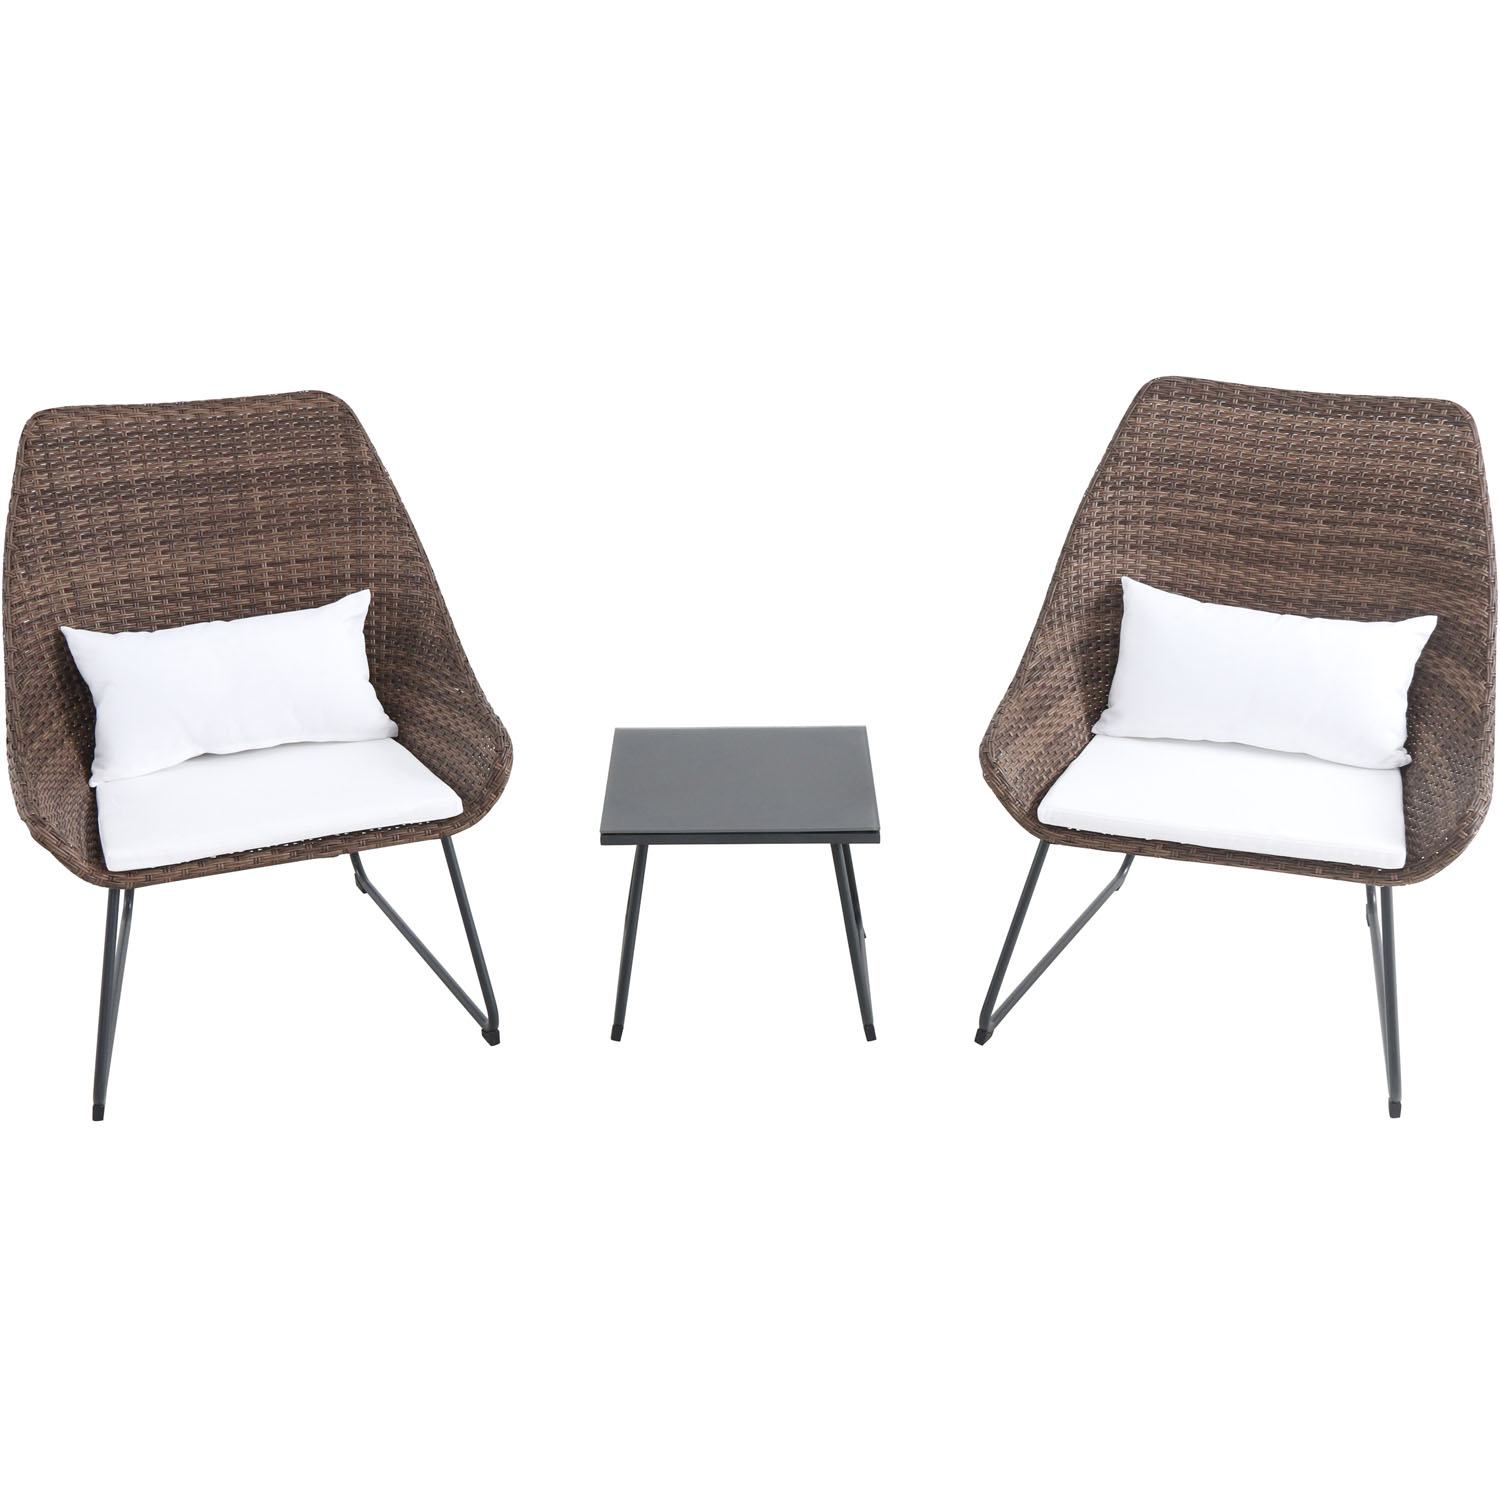 Hanover 3-Piece Wicker Chat Set | Modern Outdoor Furniture | 2 Scoop Chairs, 15'' Square Side Table | Rust-Resistant Steel Frames | White Cushions, Pillows | ACCENT3PC-WHT - image 1 of 16